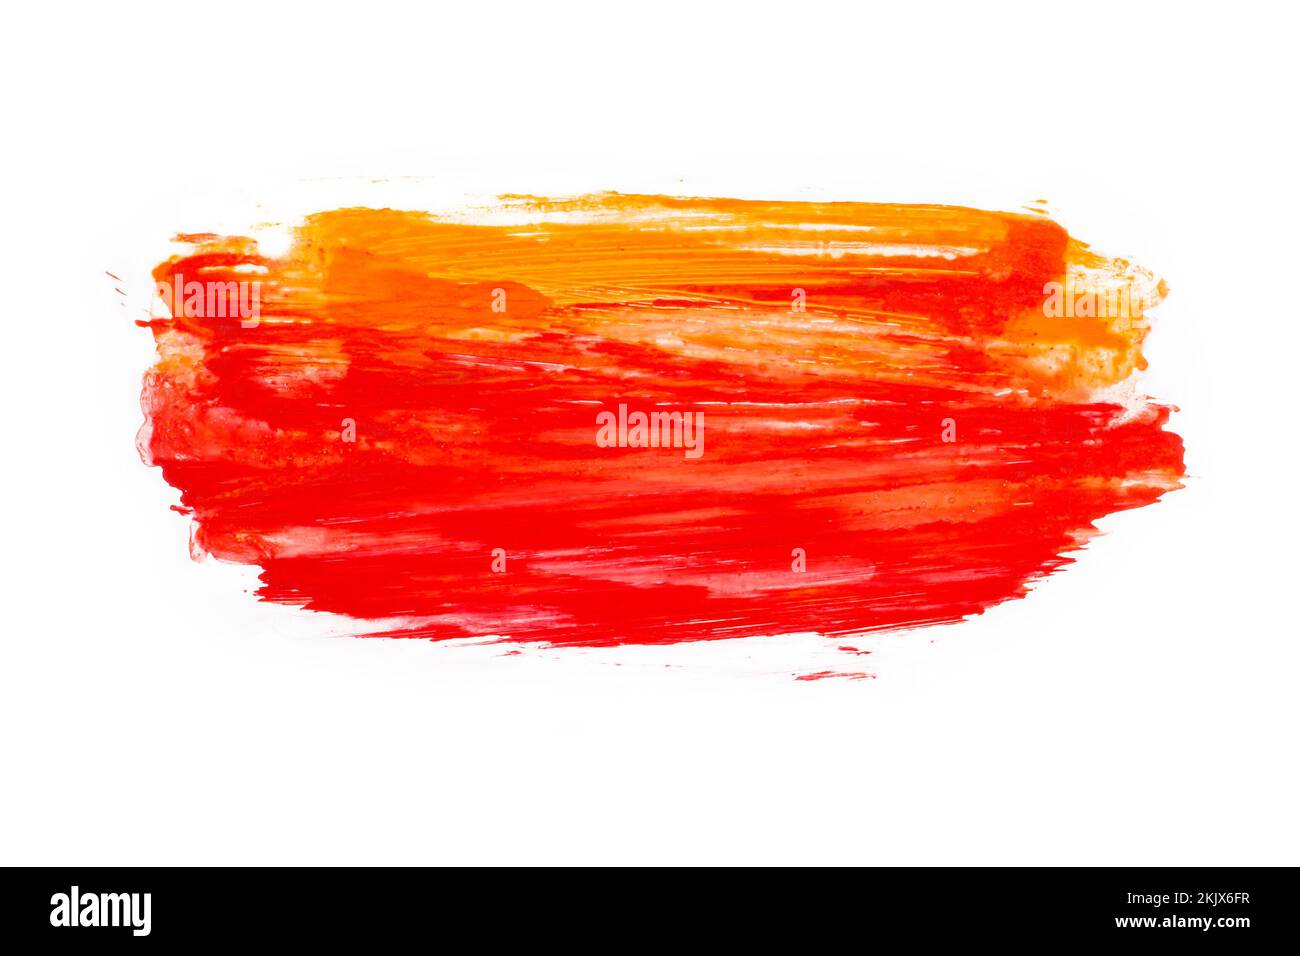 Abstract artistic acrylic red and orange color brush stroke. Isolated on white background. Stock Photo